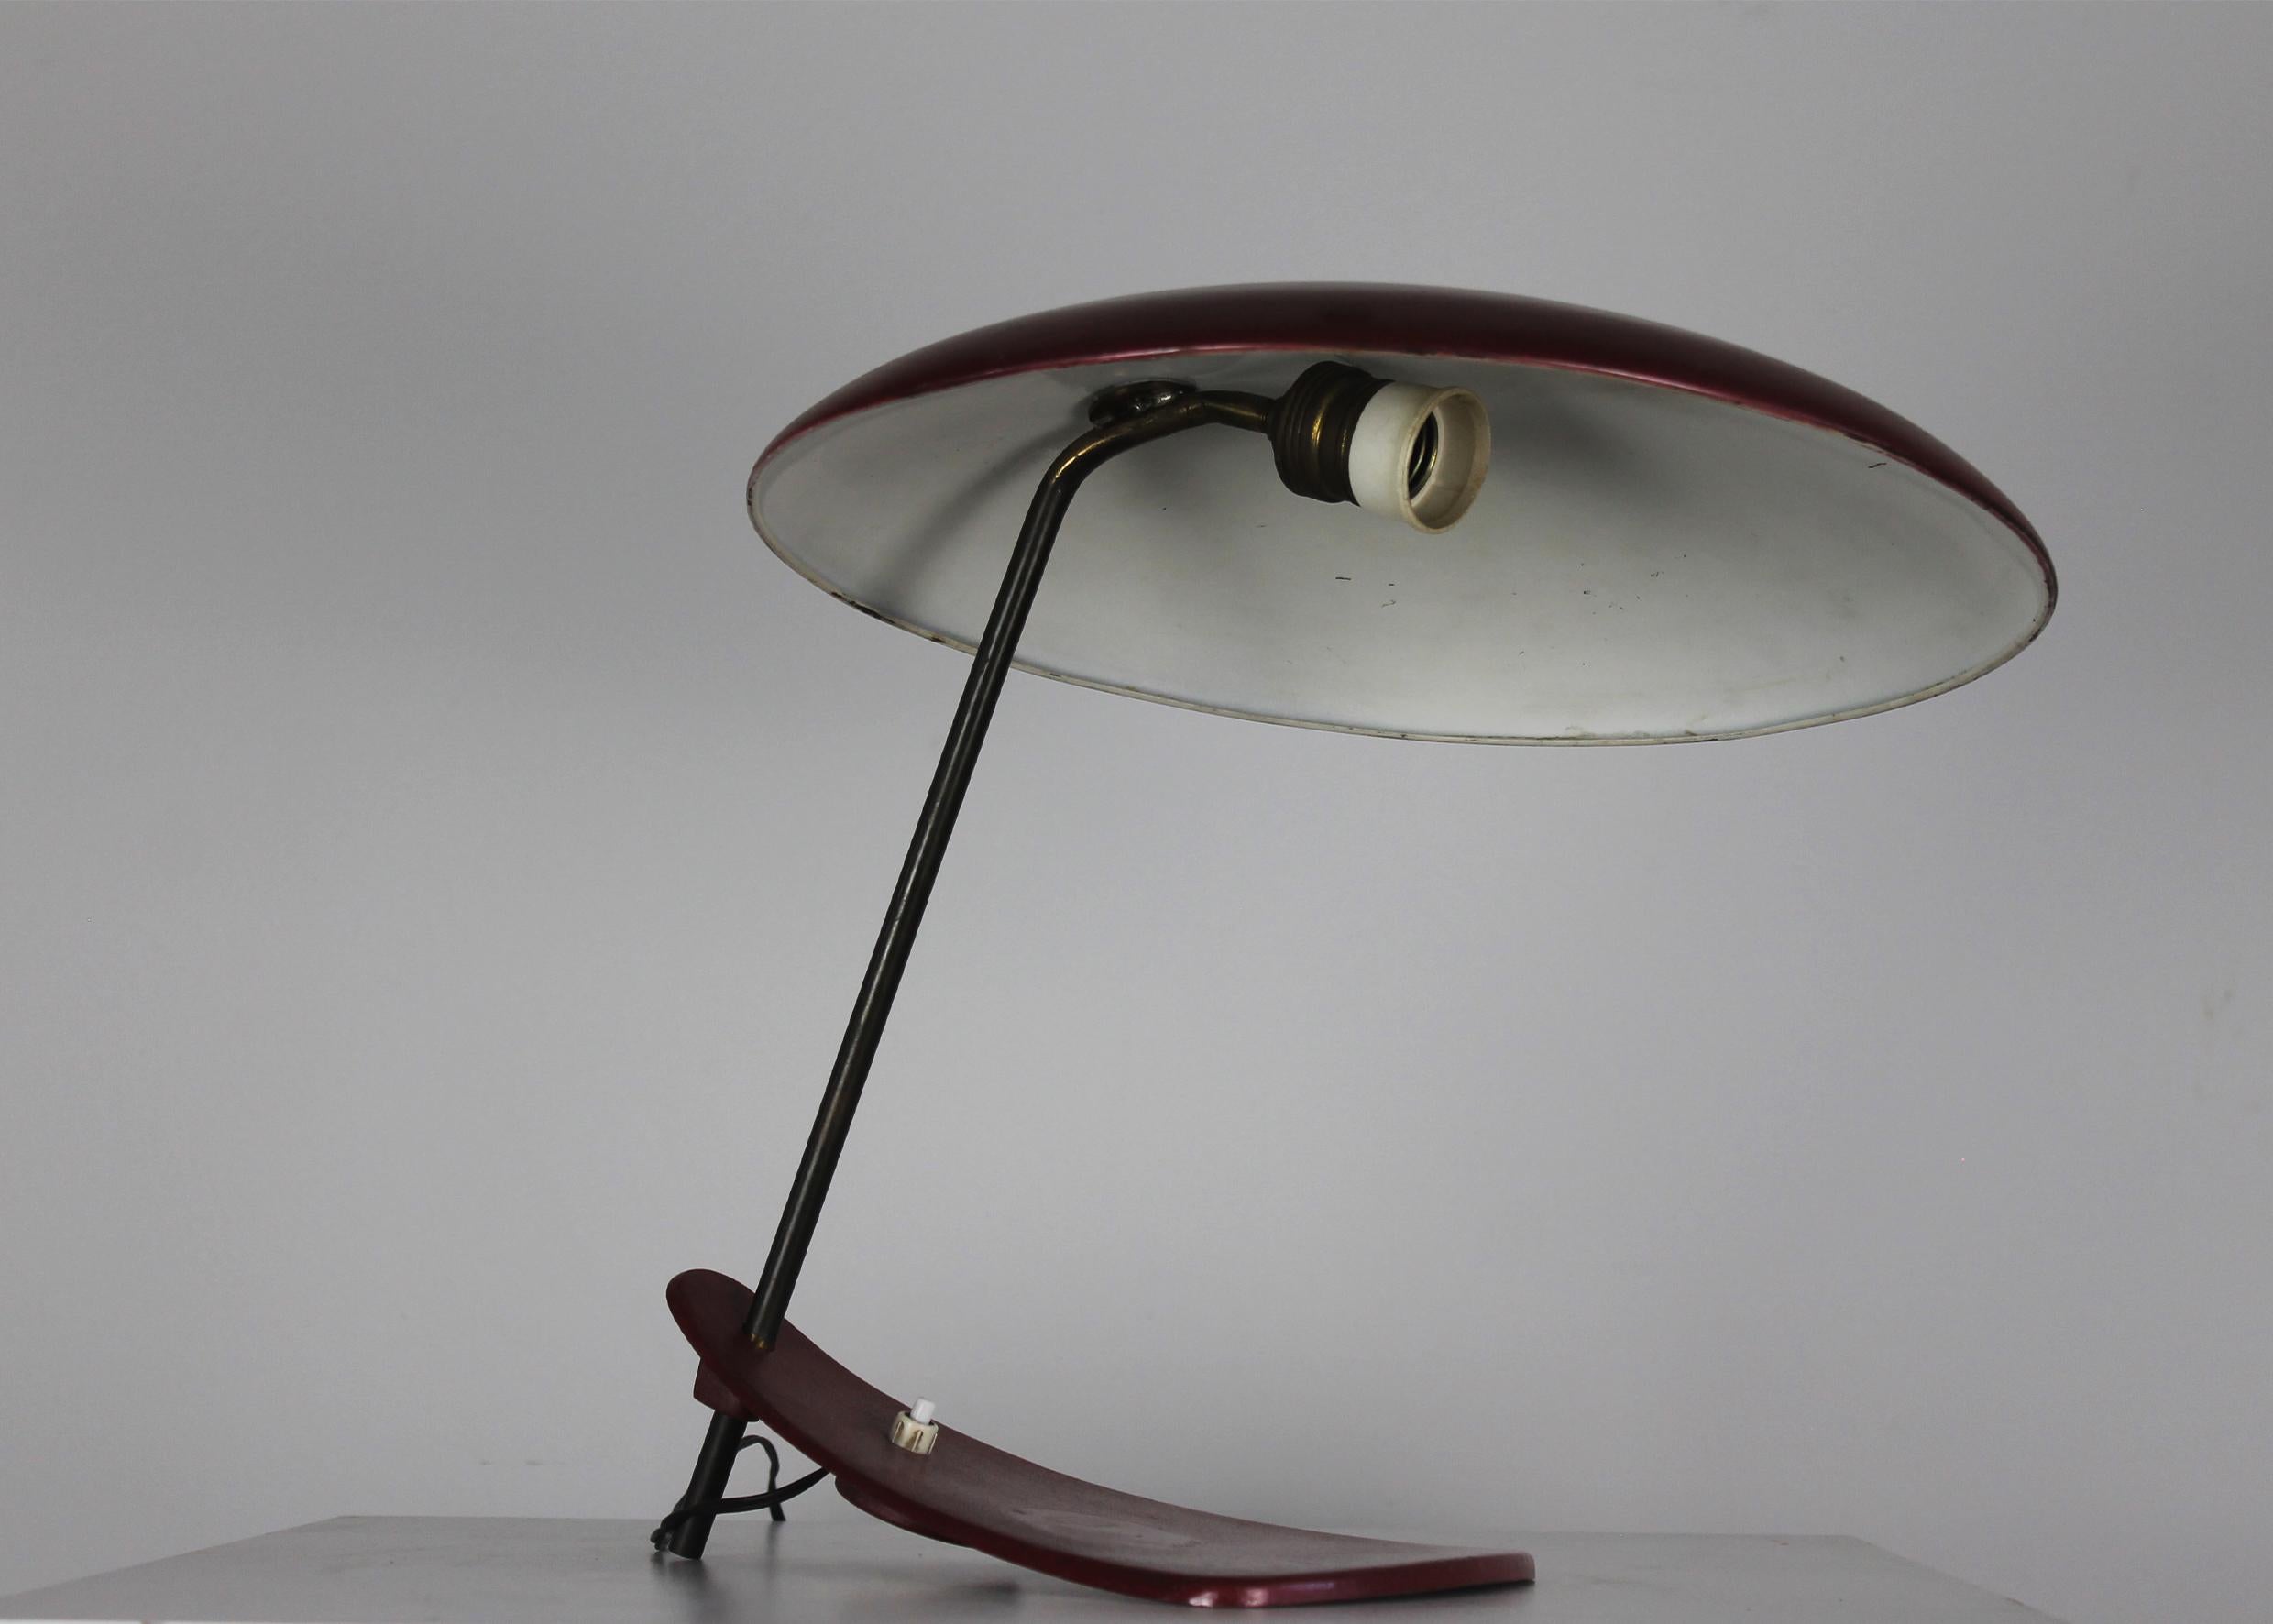 Mid-20th Century Mid-Century Modern Table Lamp in Red Lacquered Metal Italian Manufacture 1950s For Sale